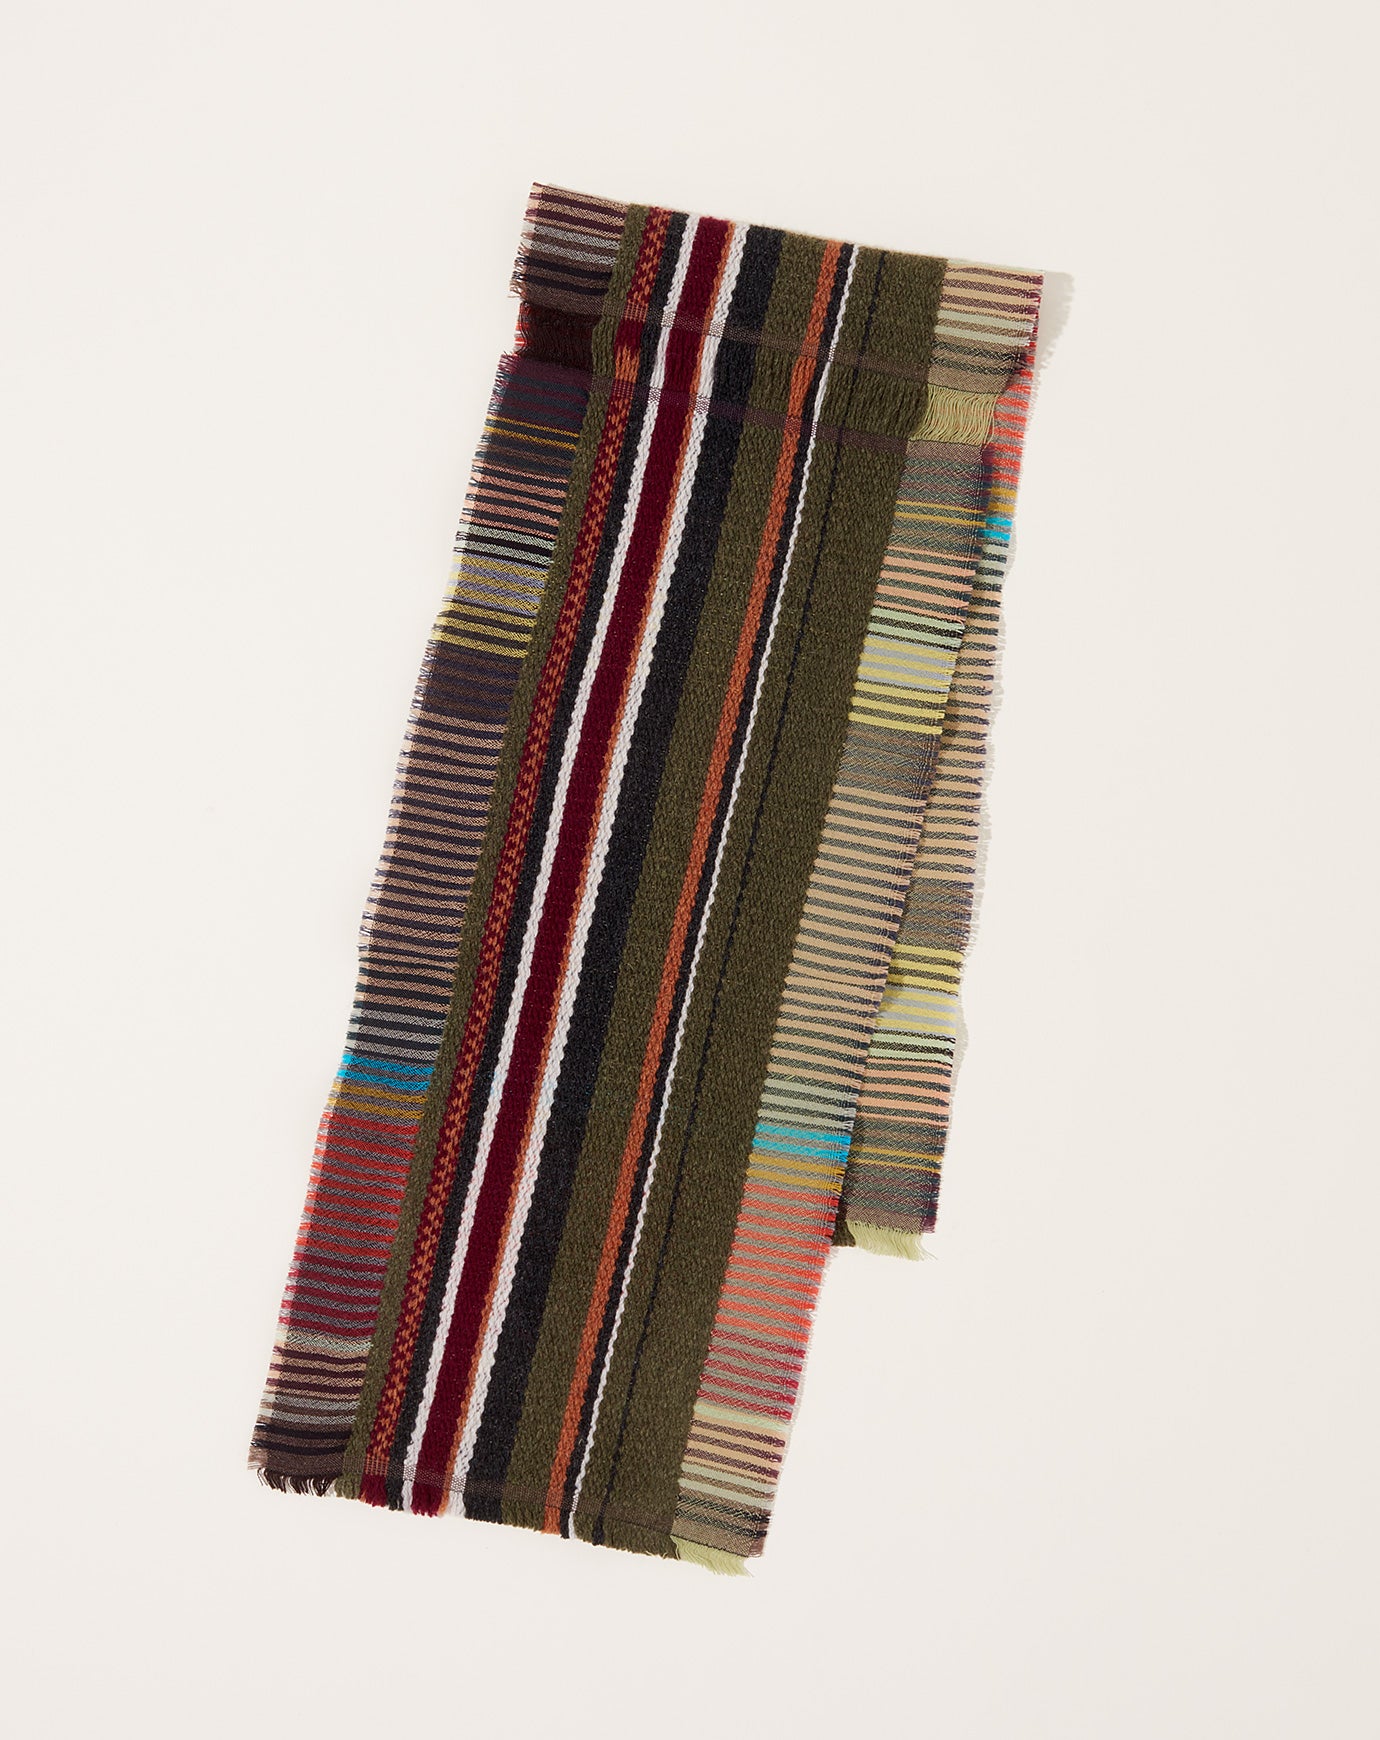 Wallace Sewell Delphine Tippet Scarf in Olive